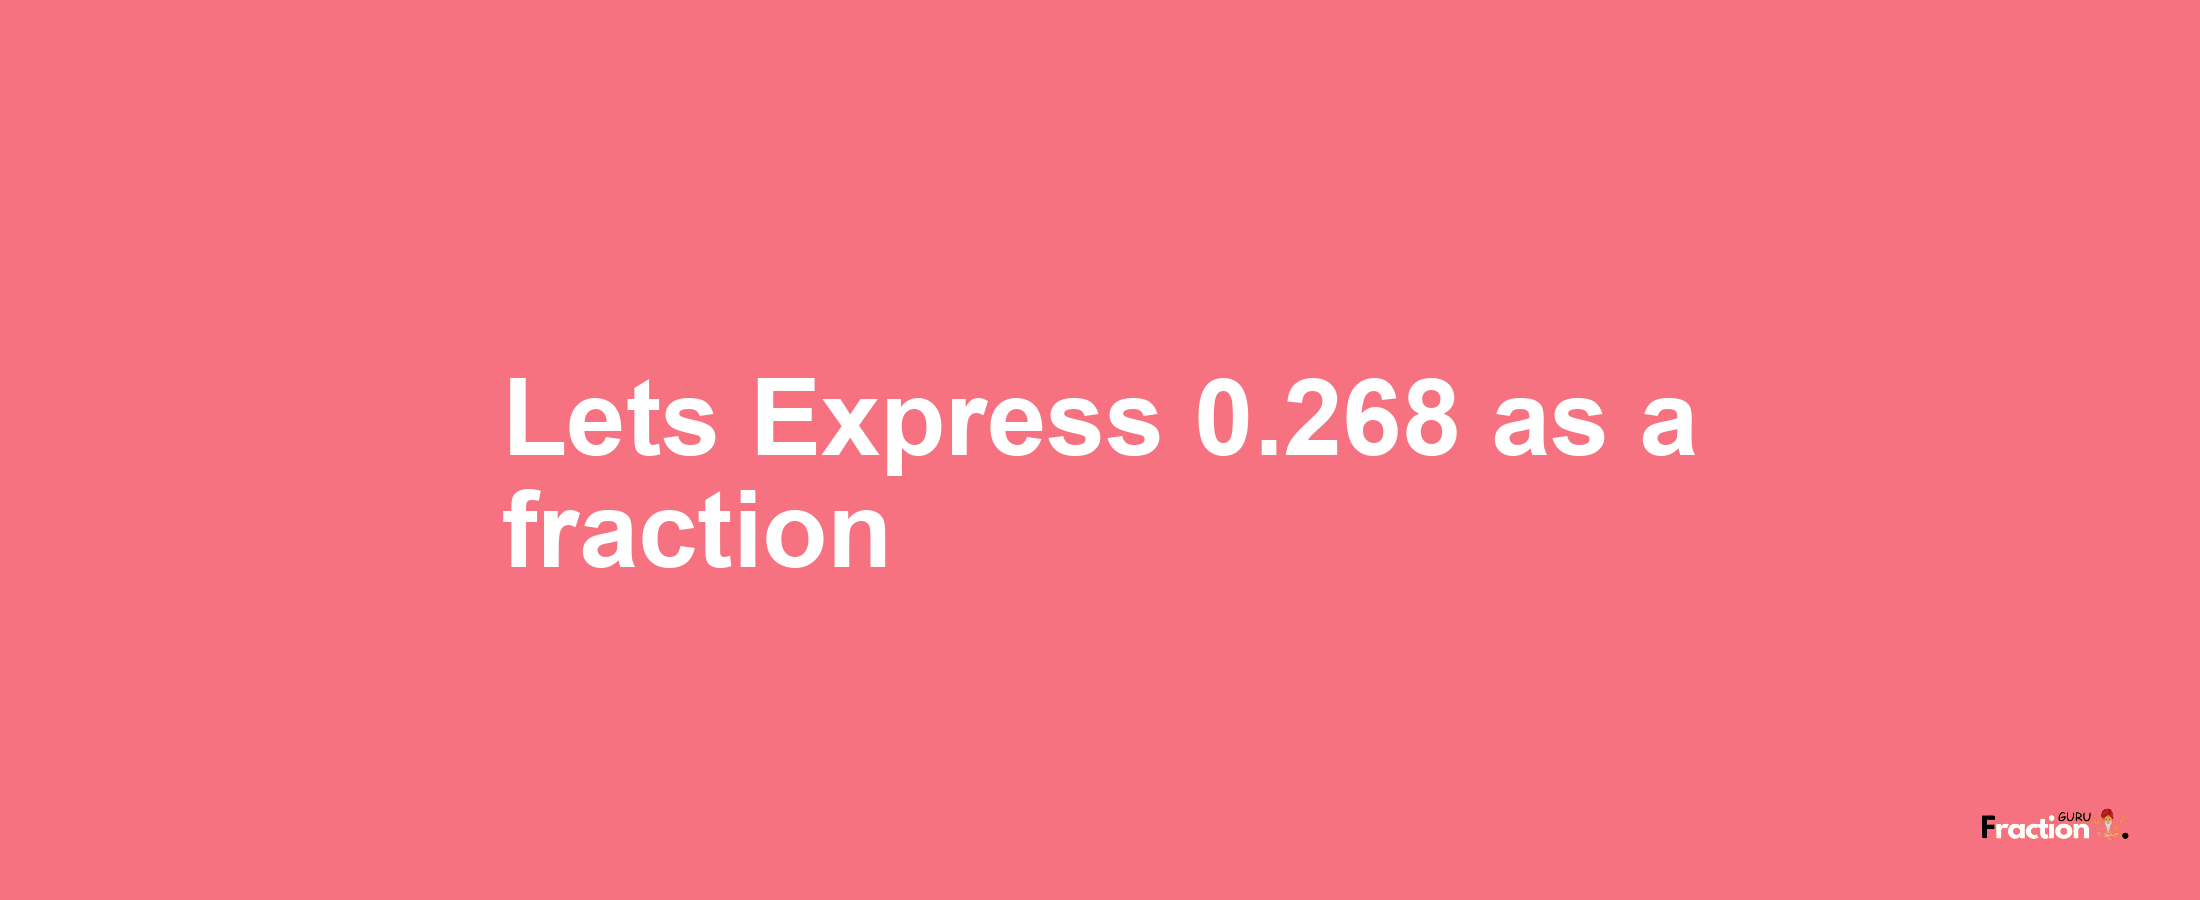 Lets Express 0.268 as afraction